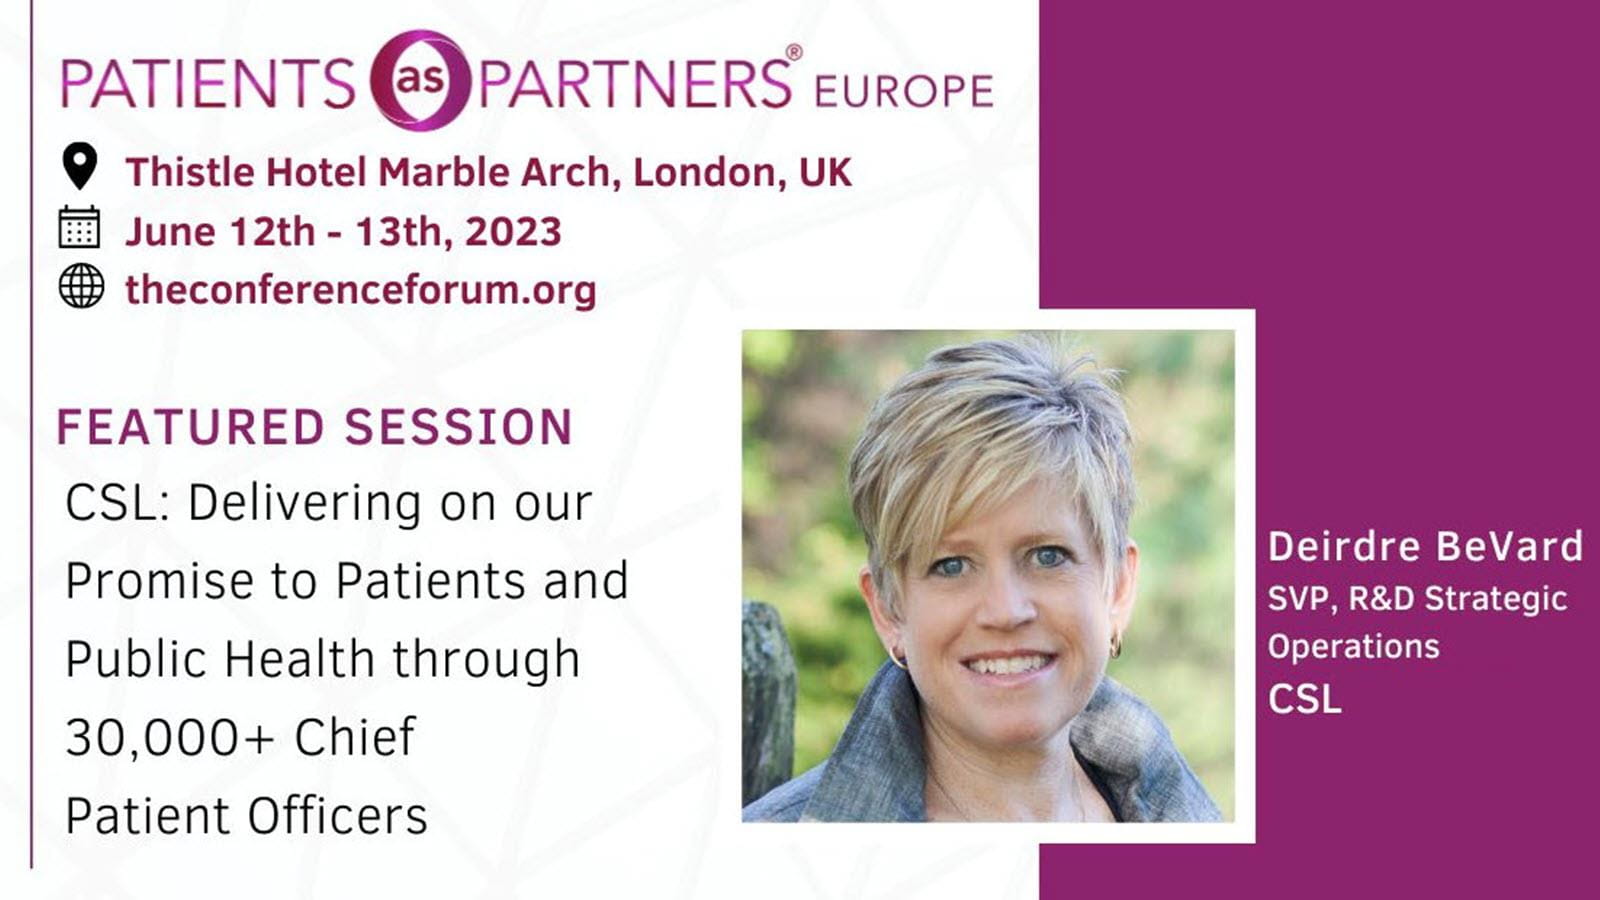 CSL's Deirdre BeVard will present at Patients as Partners Europe in June 2023